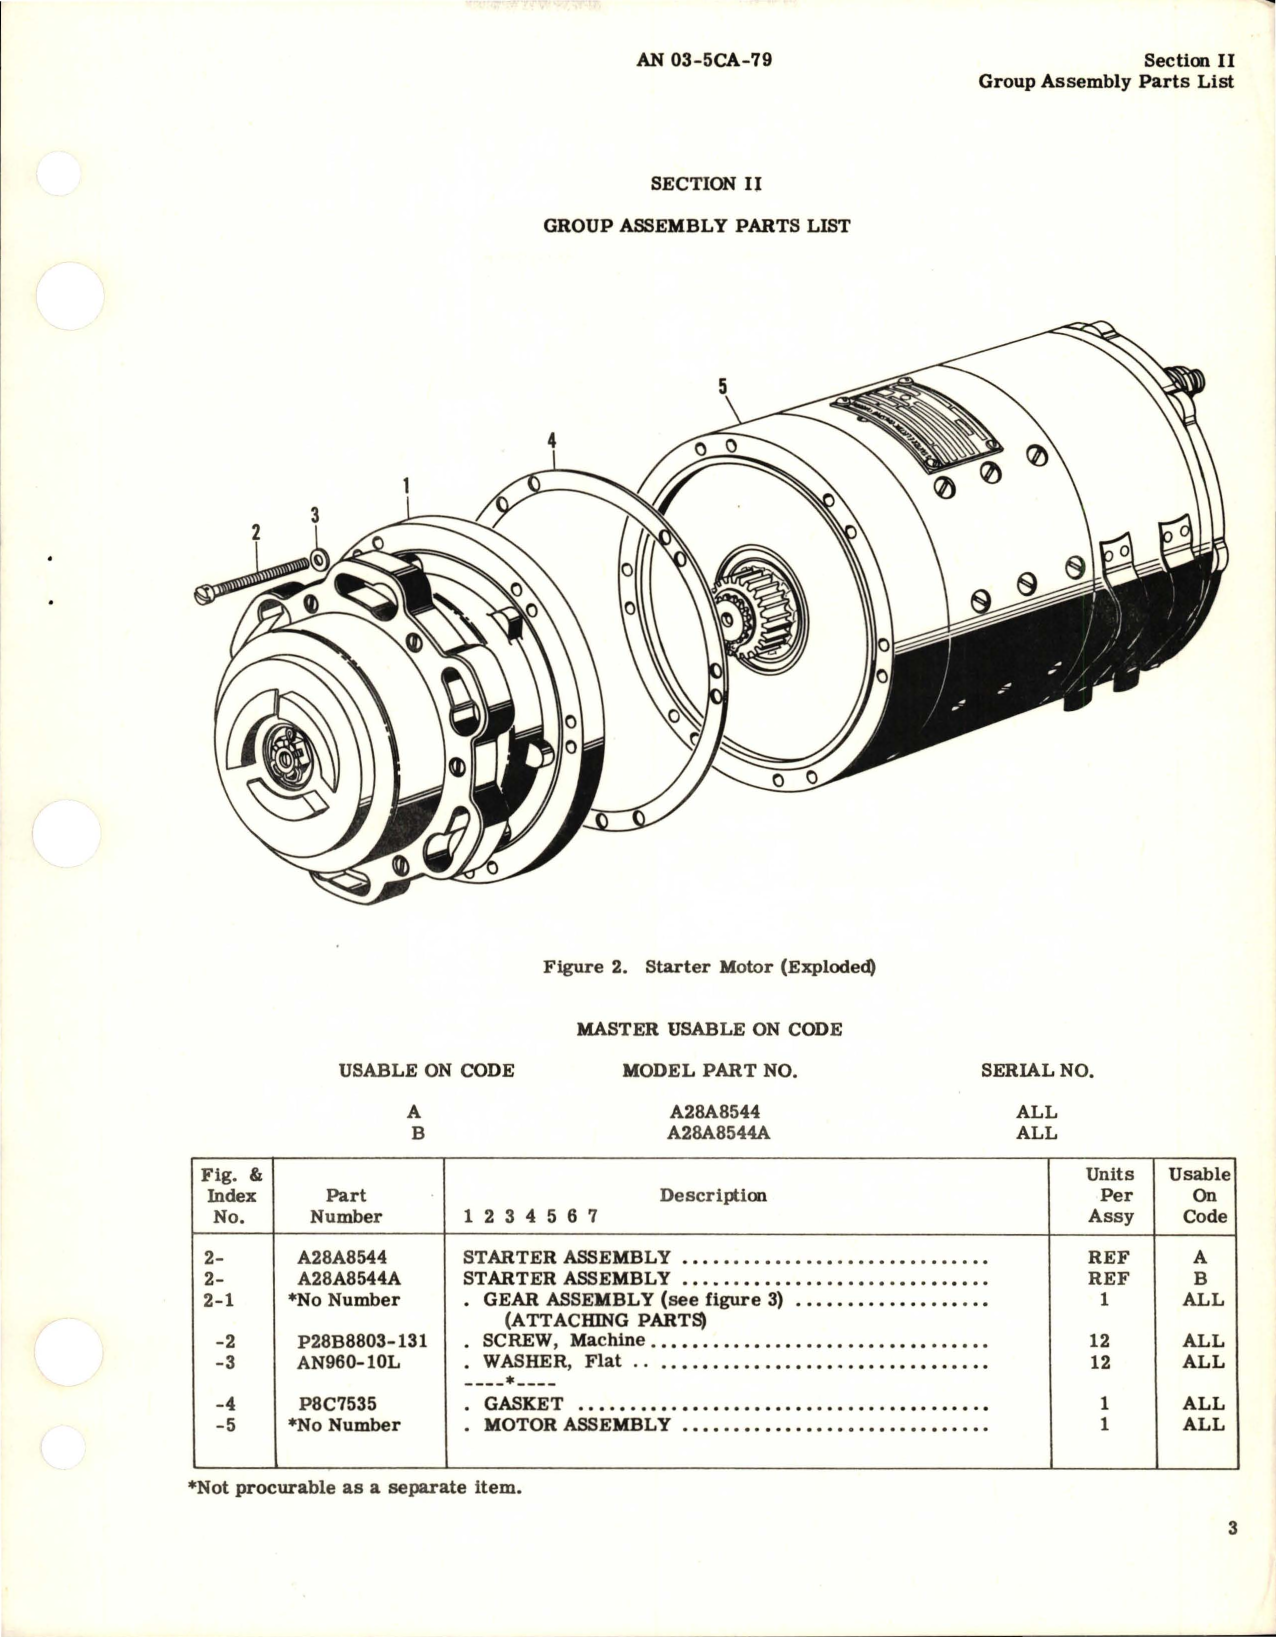 Sample page 5 from AirCorps Library document: Illustrated Parts Breakdown for Electric Starters (for Gas Turbine Engines) Models A28A8544, and A28A8544A